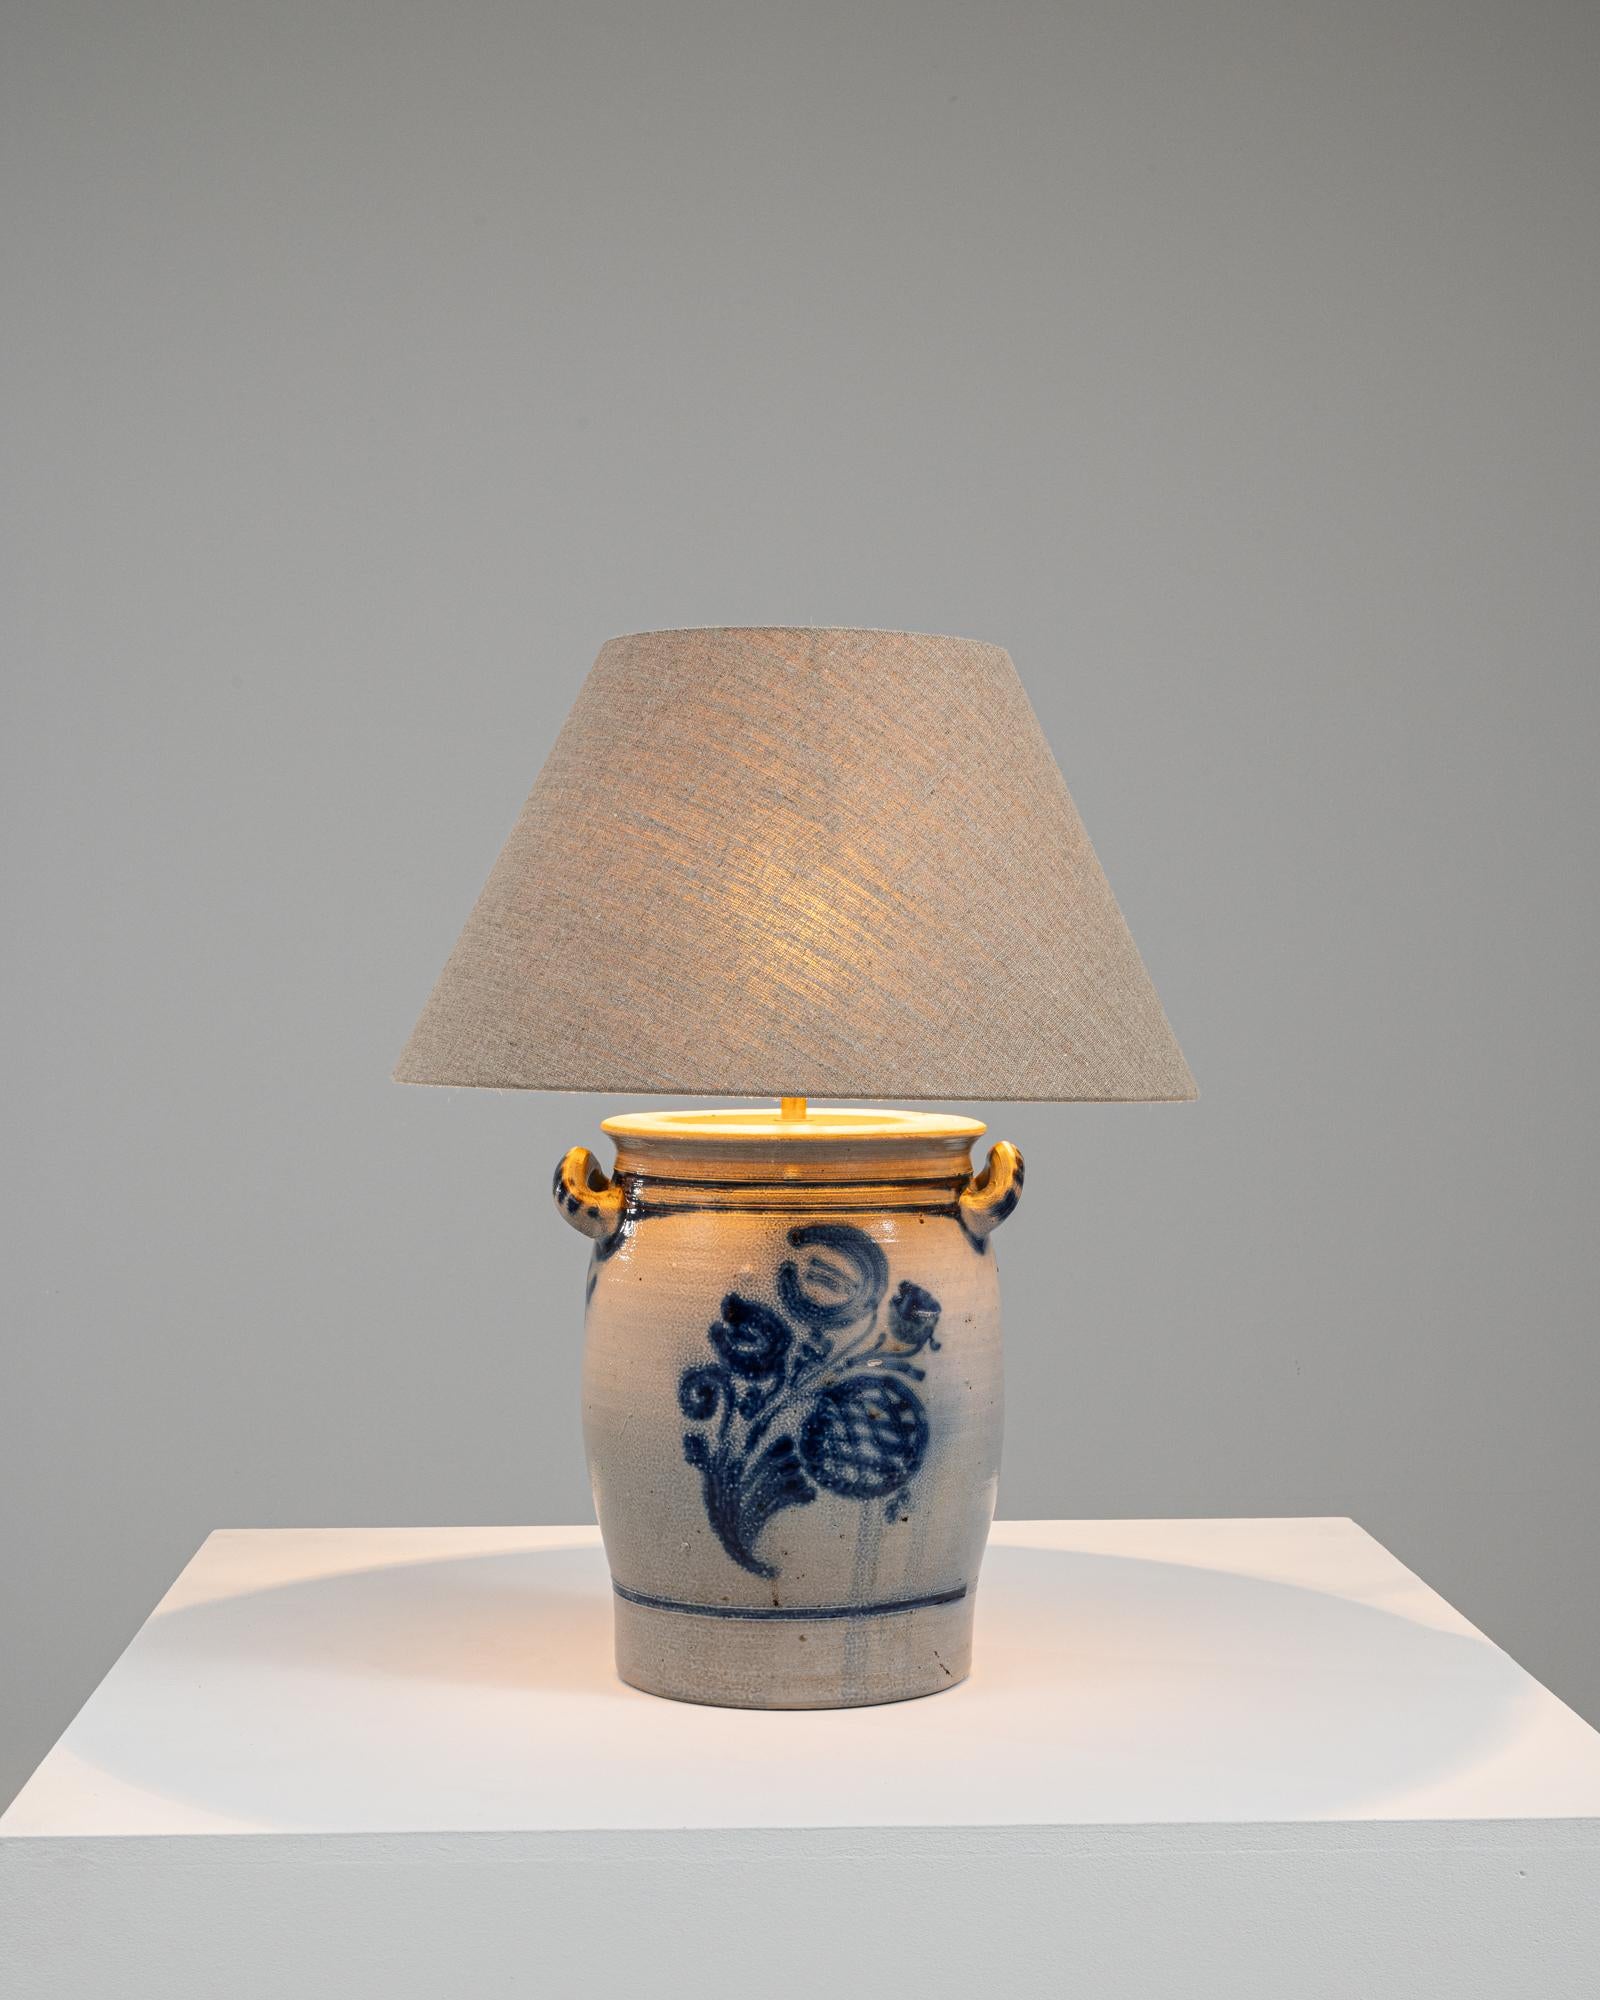 Immerse yourself in the captivating charm of this 1900s Belgian ceramic table lamp, a piece that beautifully merges artistic heritage with functionality. The base of the lamp is a classic Belgian ceramic pot, adorned with a striking blue floral